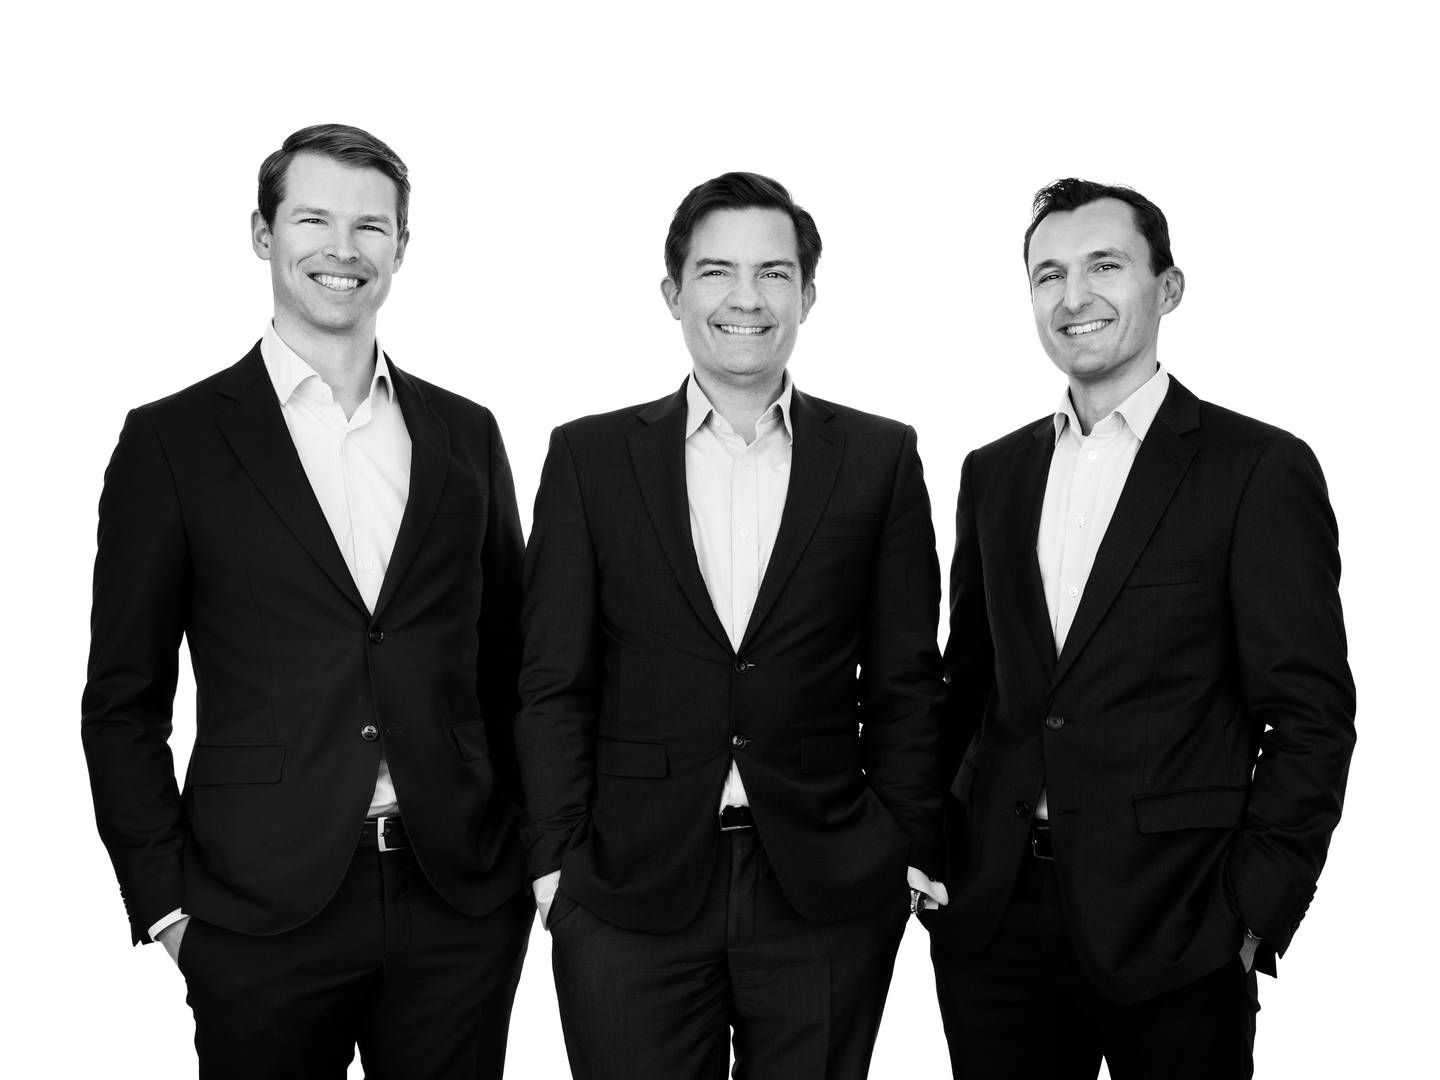 The three founders of Jera Capital. From left: Alexander Reventlow, Christen Estrup and Julien Marencic left Nordea Asset Management in the fall of 2021 to become self-employed. | Photo: Pr / Jera Capital